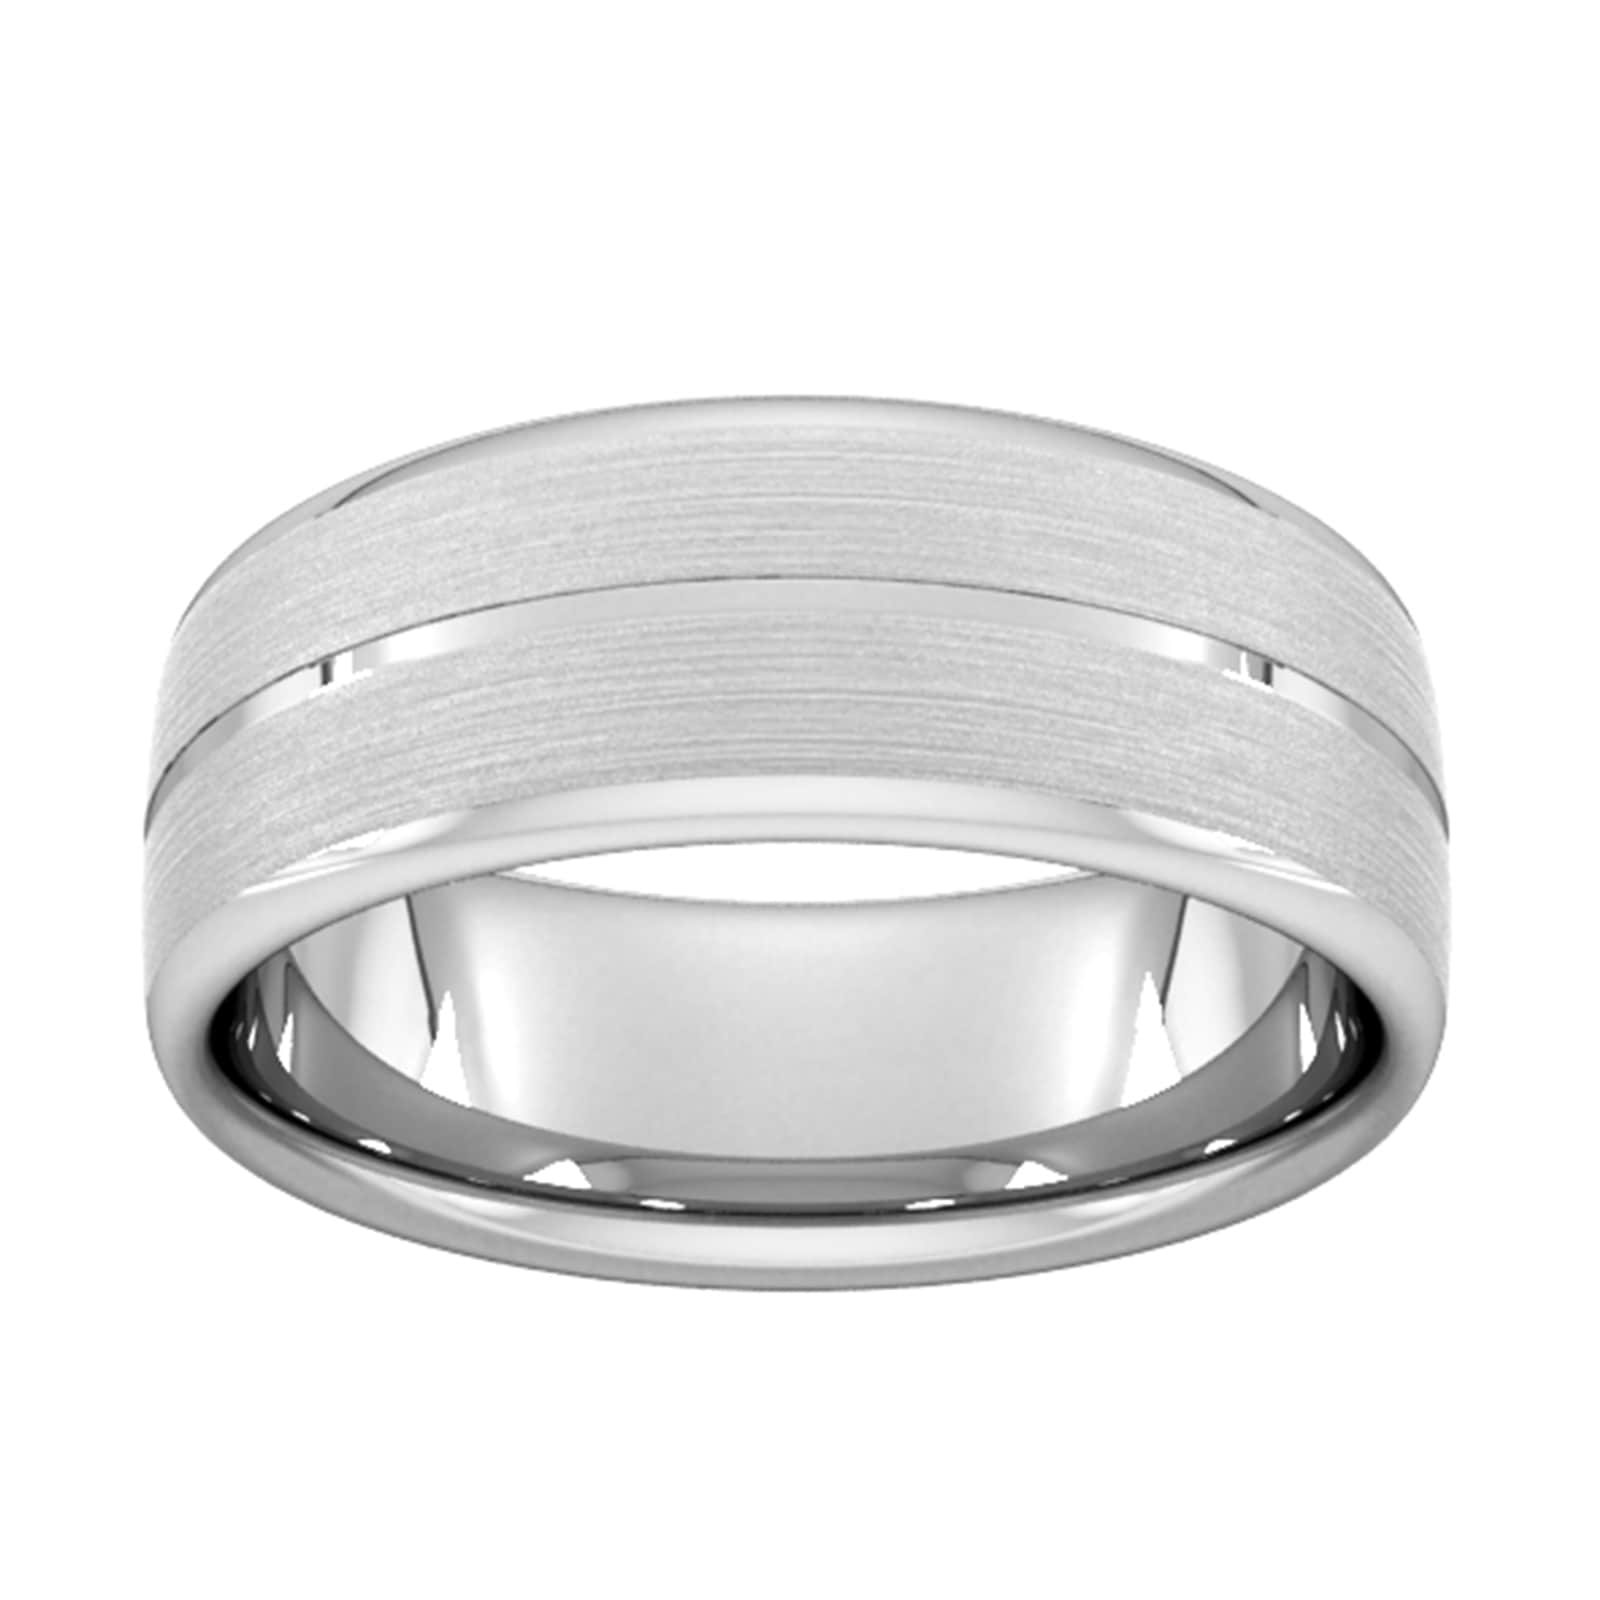 8mm Slight Court Standard Centre Groove With Chamfered Edge Wedding Ring In 9 Carat White Gold - Ring Size Z